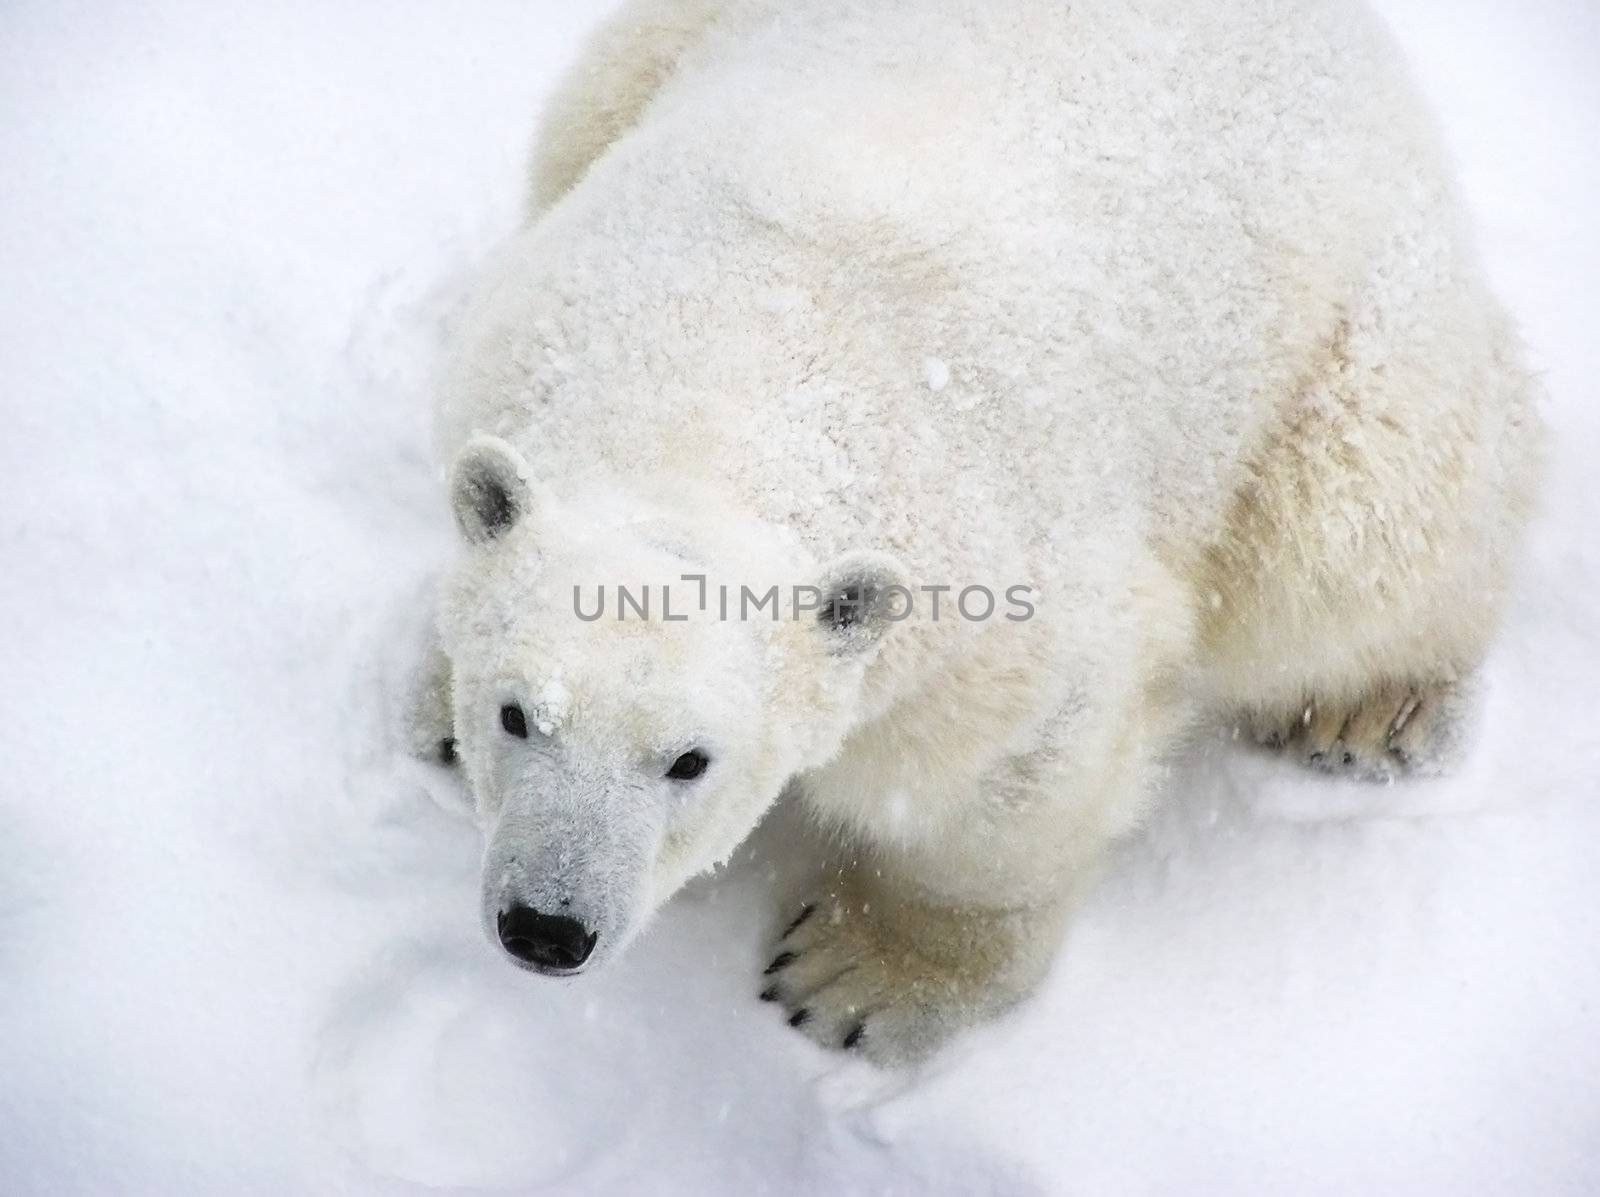 Snow covered polar bear by Mirage3